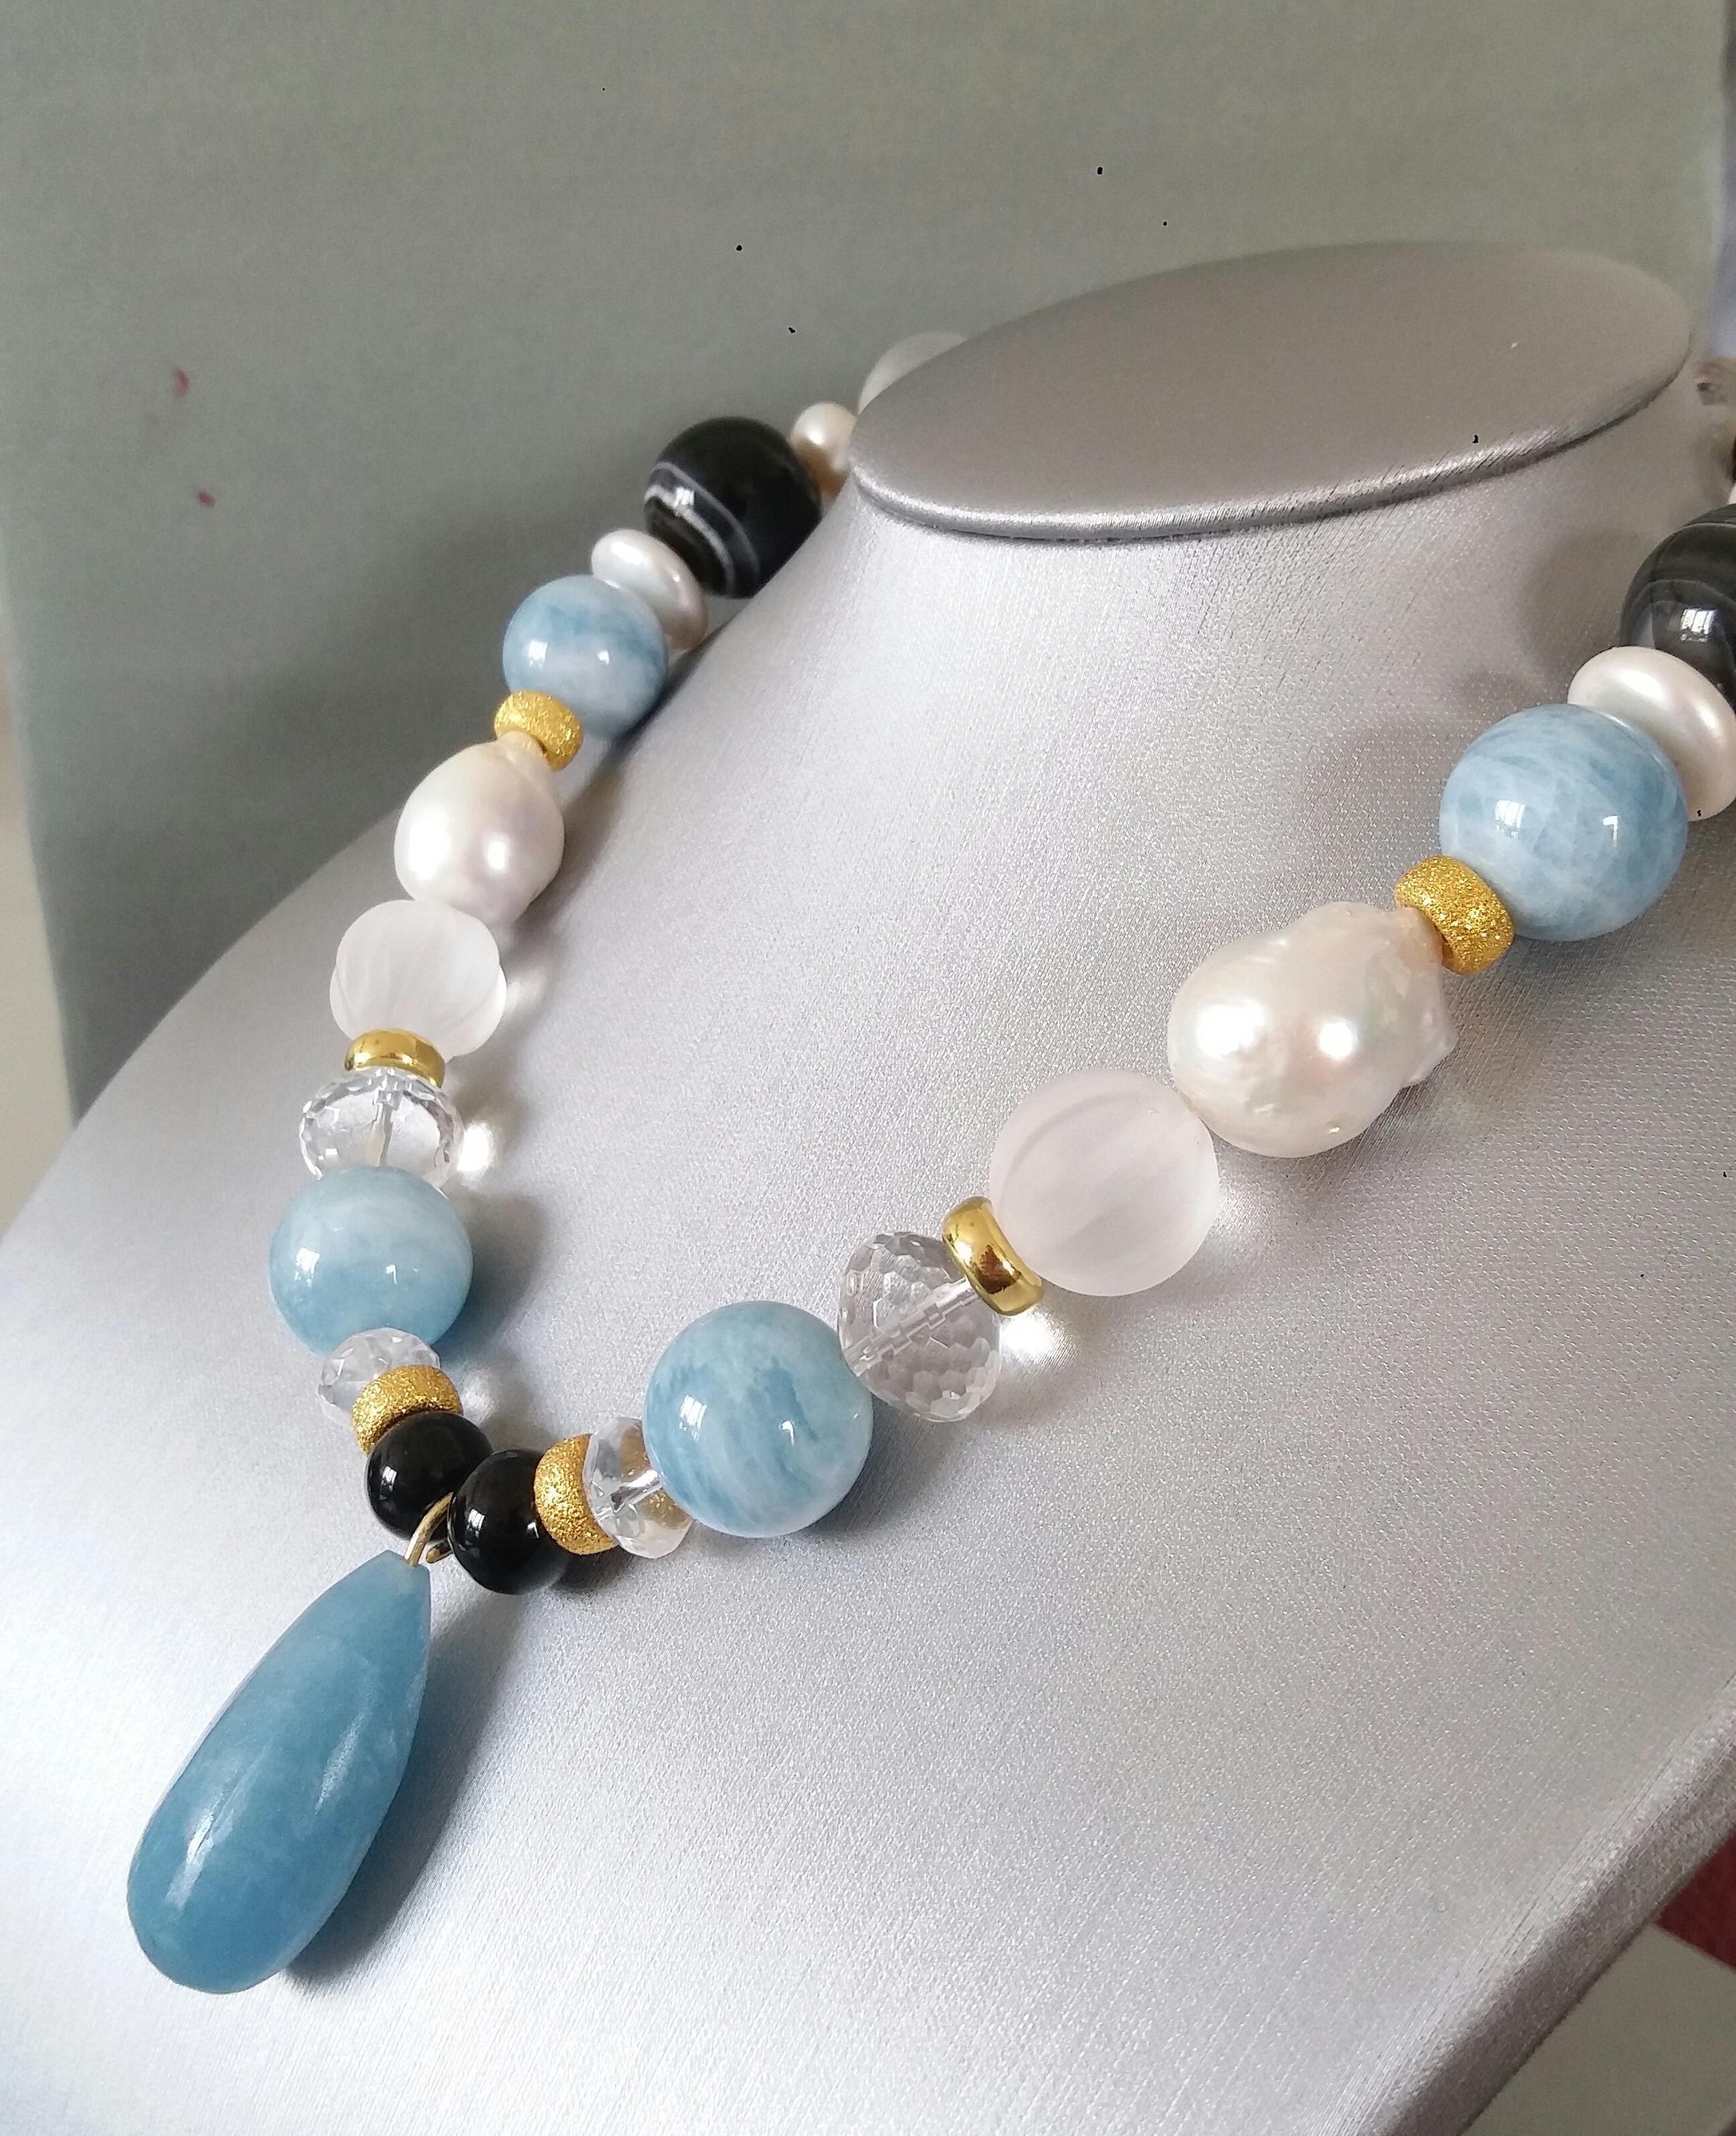 Aquamarine Beads And Pendant Baroque Pearls Quartz Onyx Yellow Gold Necklace For Sale 2